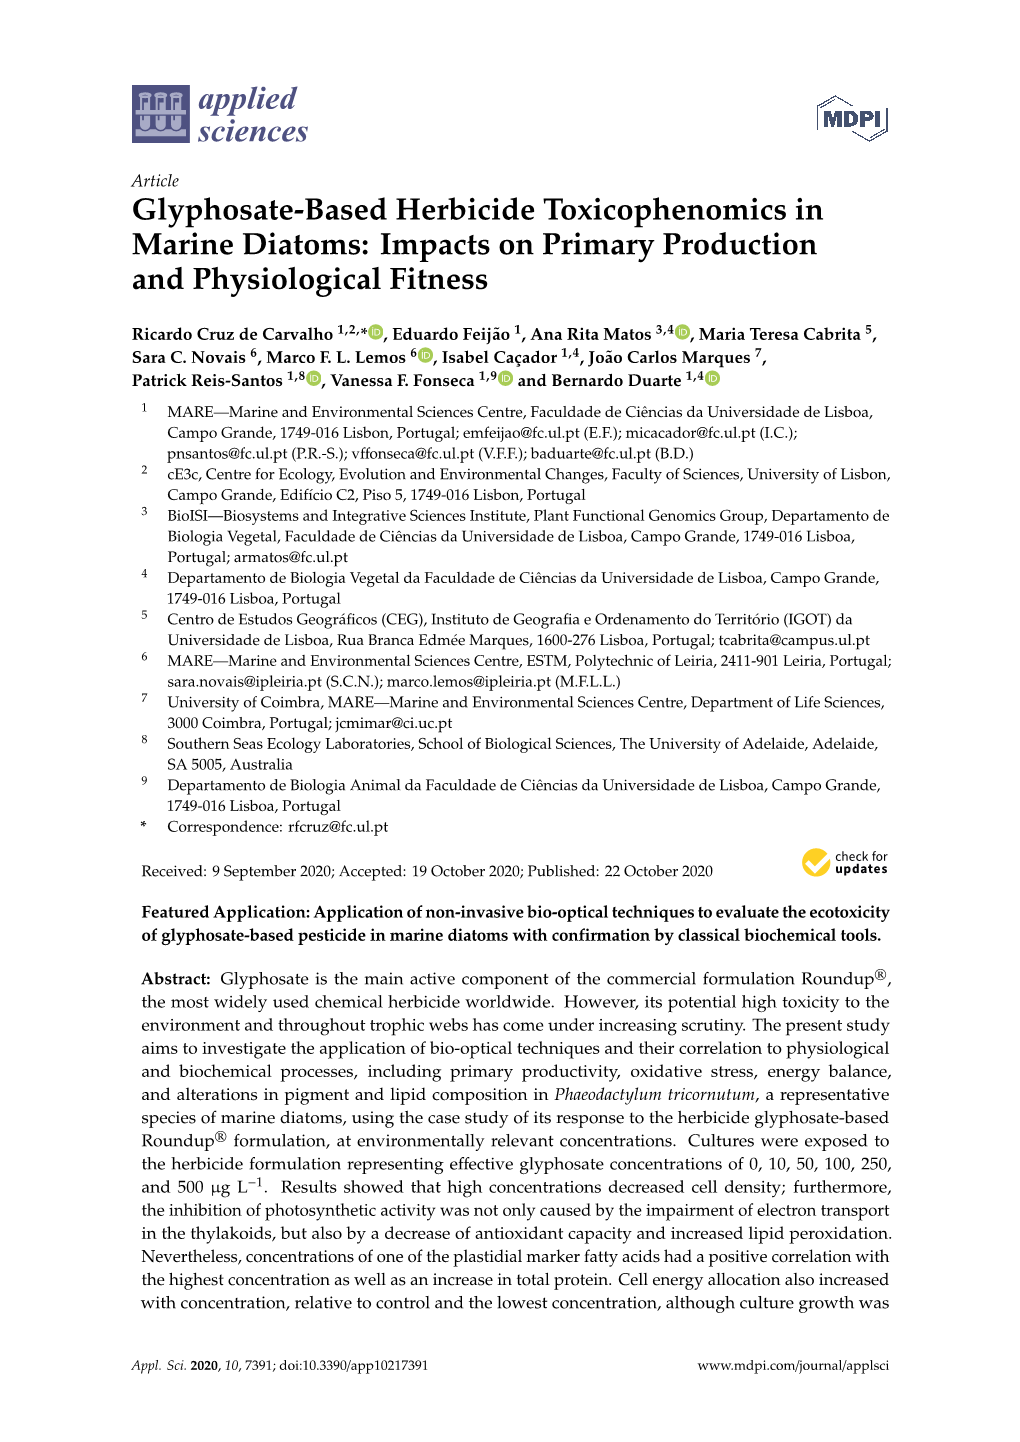 Glyphosate-Based Herbicide Toxicophenomics in Marine Diatoms: Impacts on Primary Production and Physiological Fitness